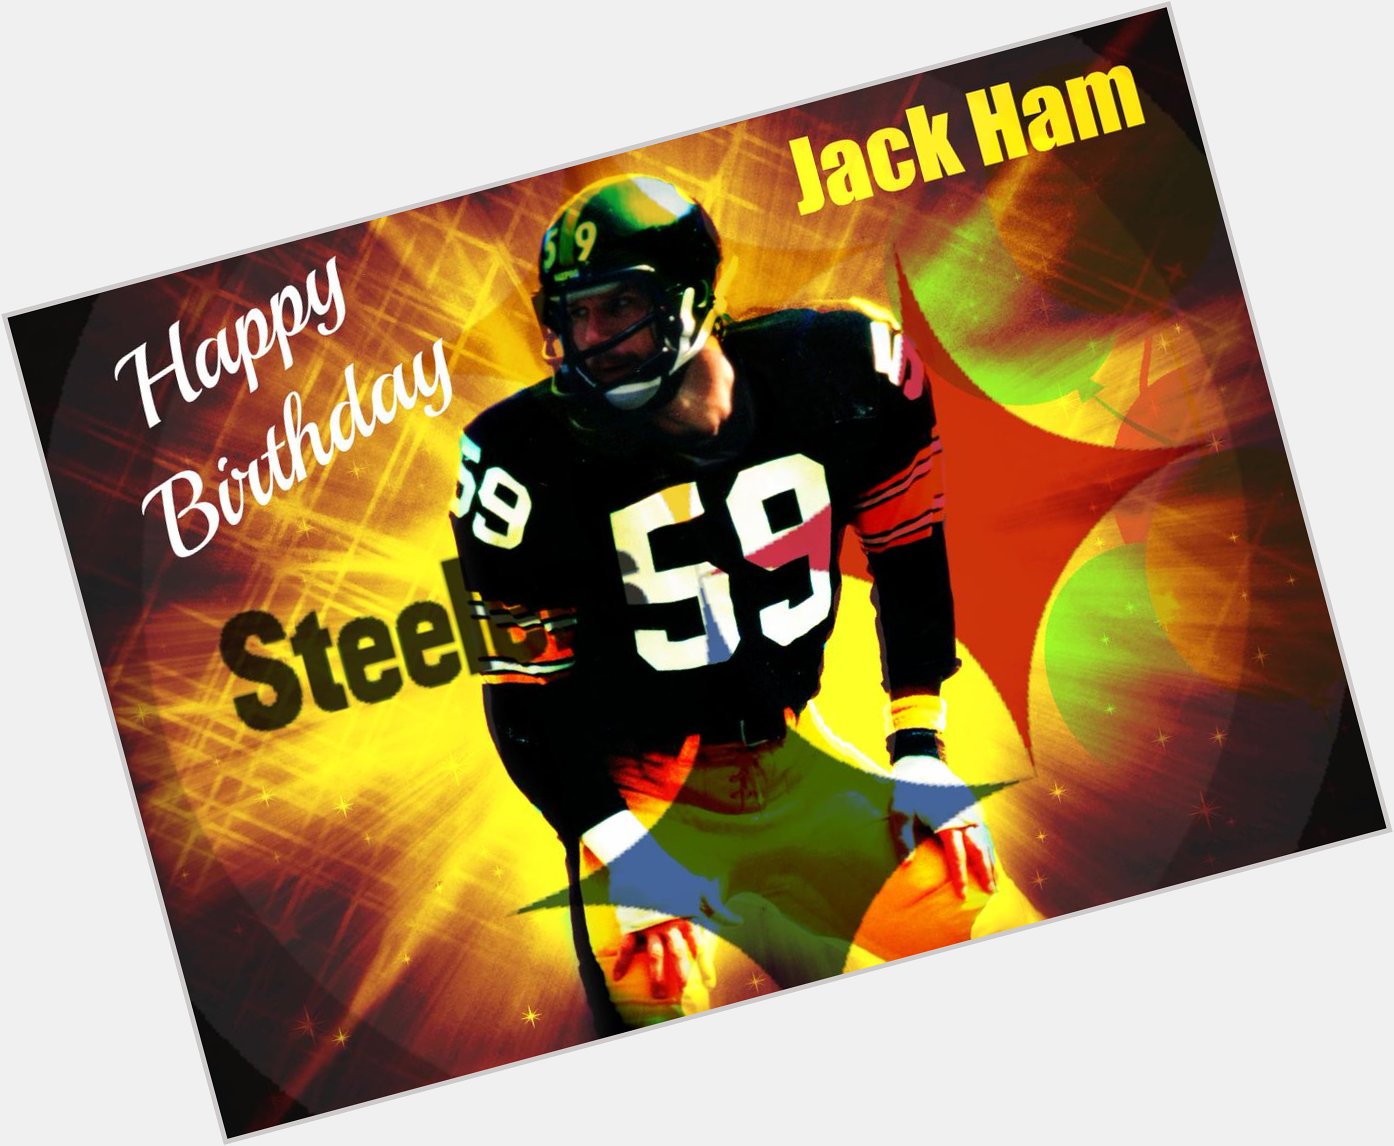 Wishing Jack Ham, the Greatest outside linebacker in the history of the NFL, a Very Happy 66th BDay! 